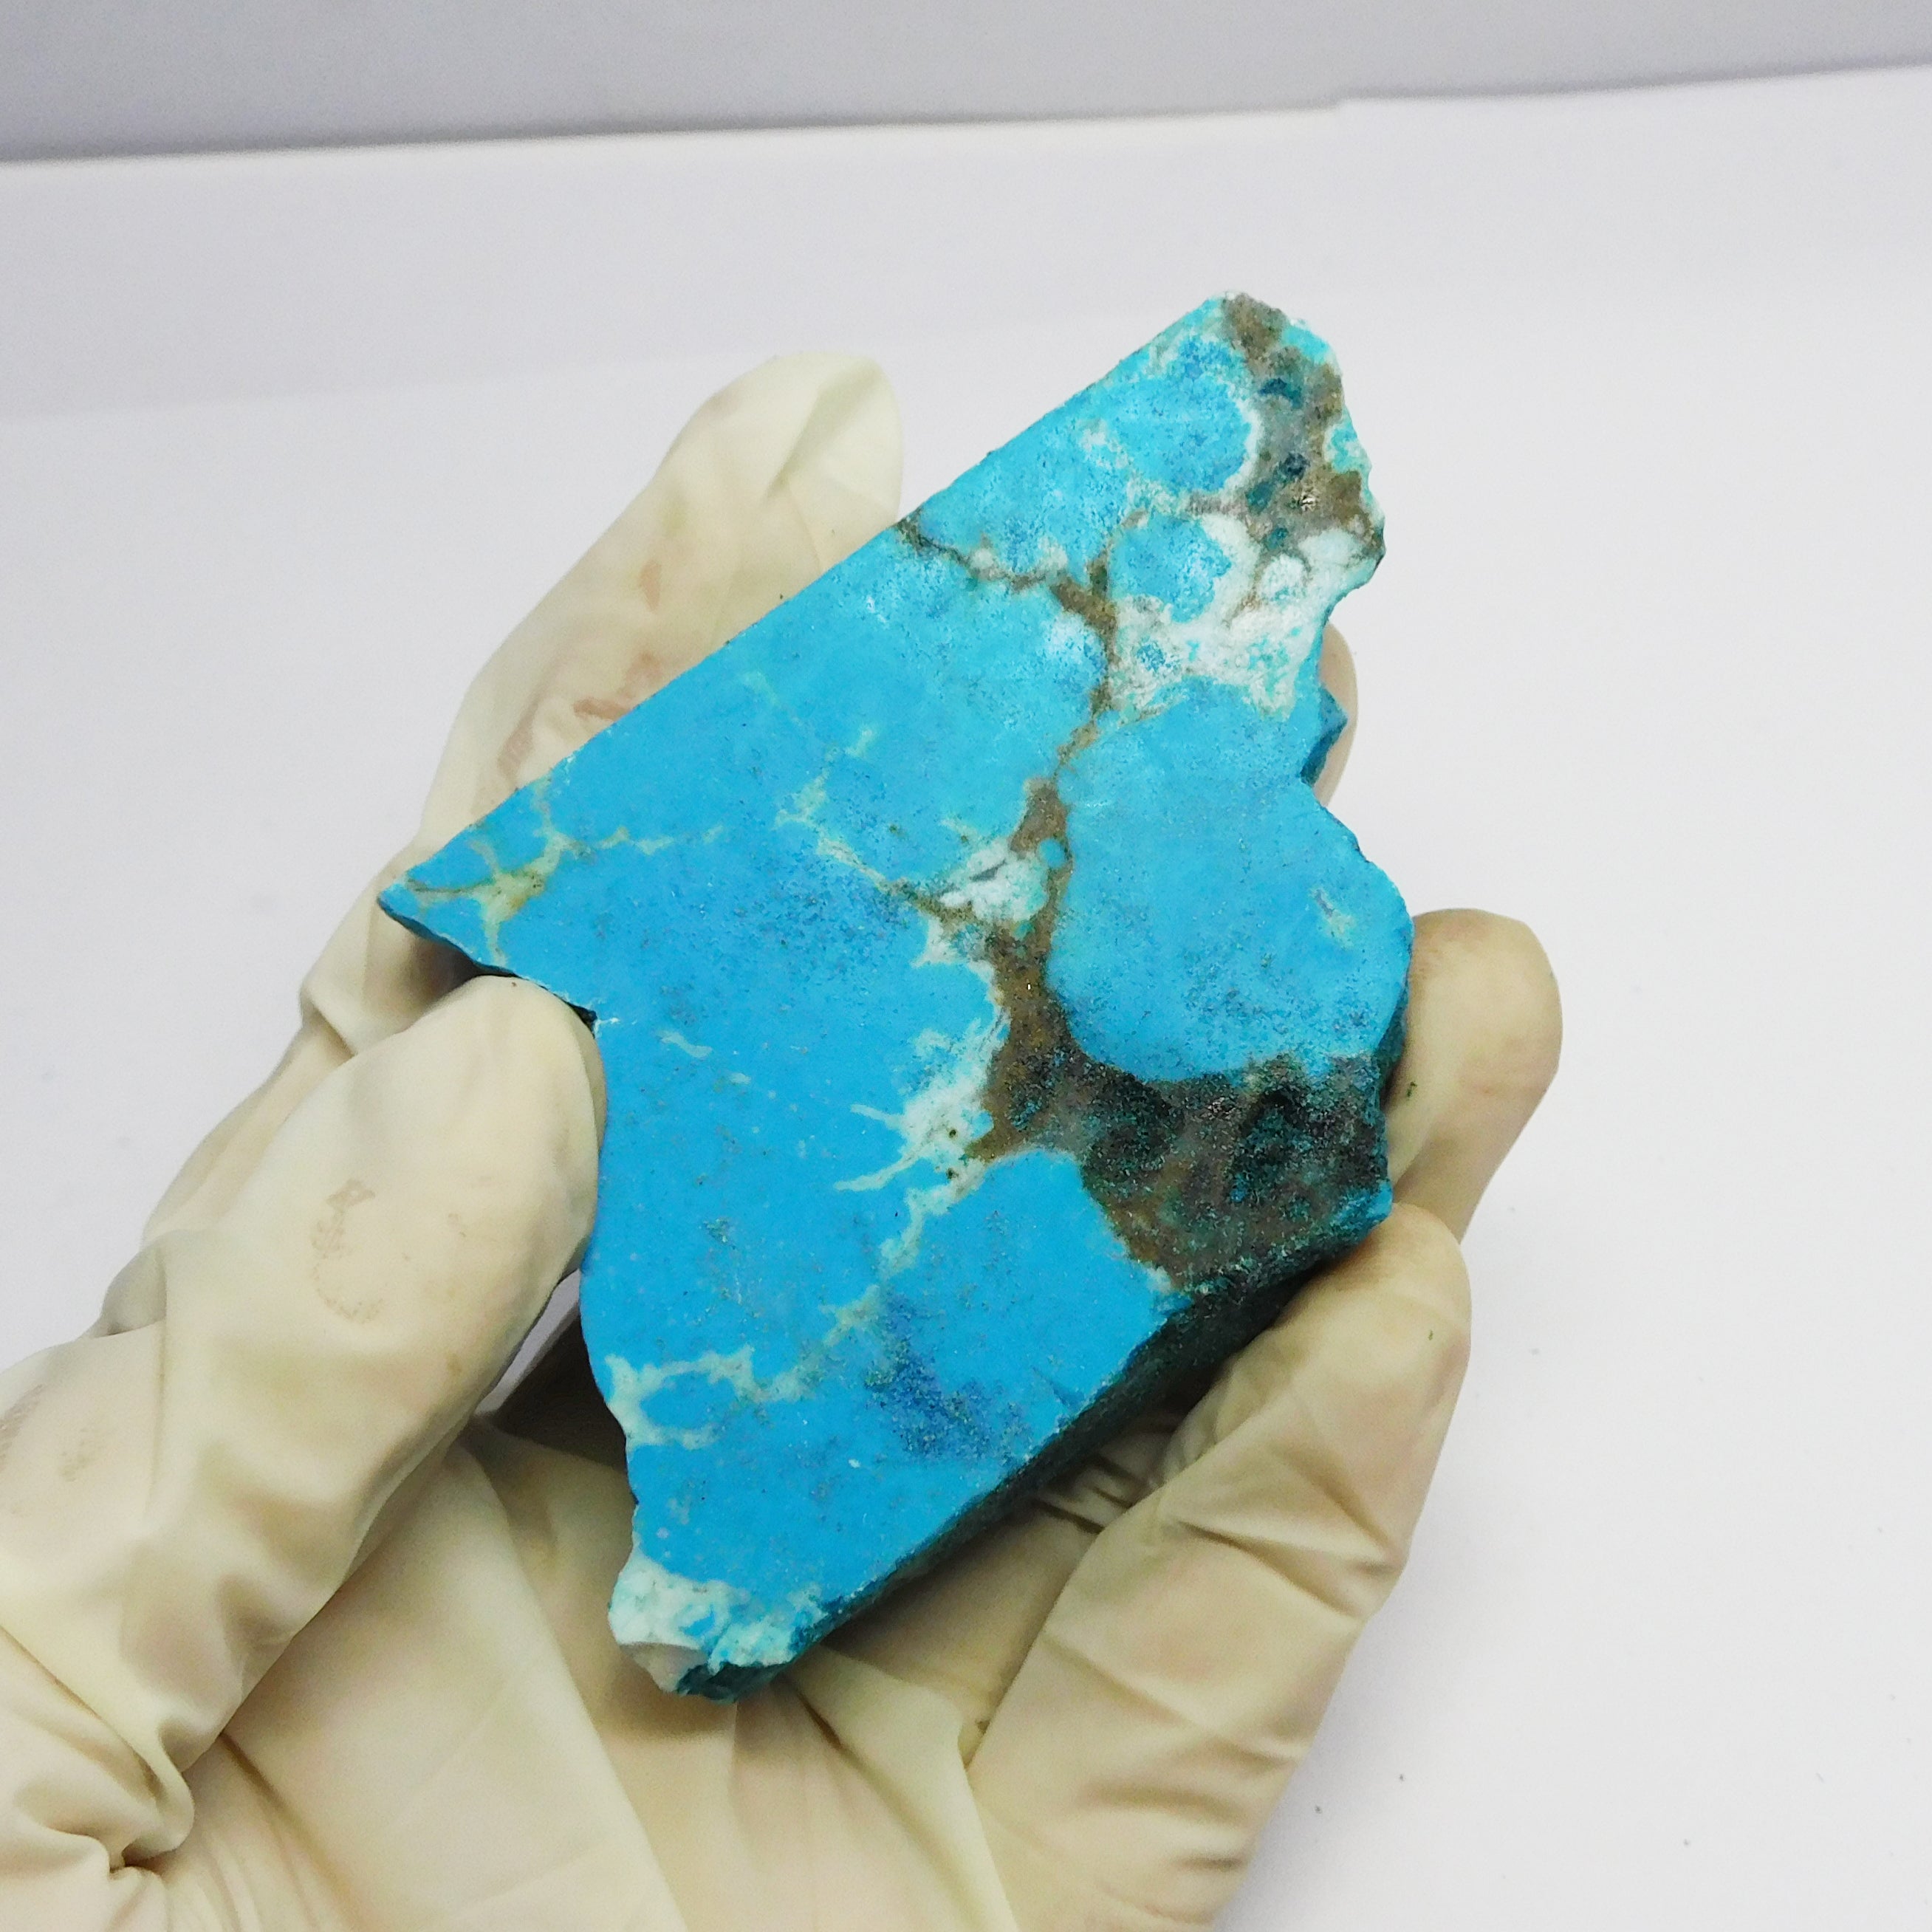 384.90 Carat Uncut Raw Natural Blue Turquoise Rough Loose Gemstone CERTIFIED | On Sale | Best Price